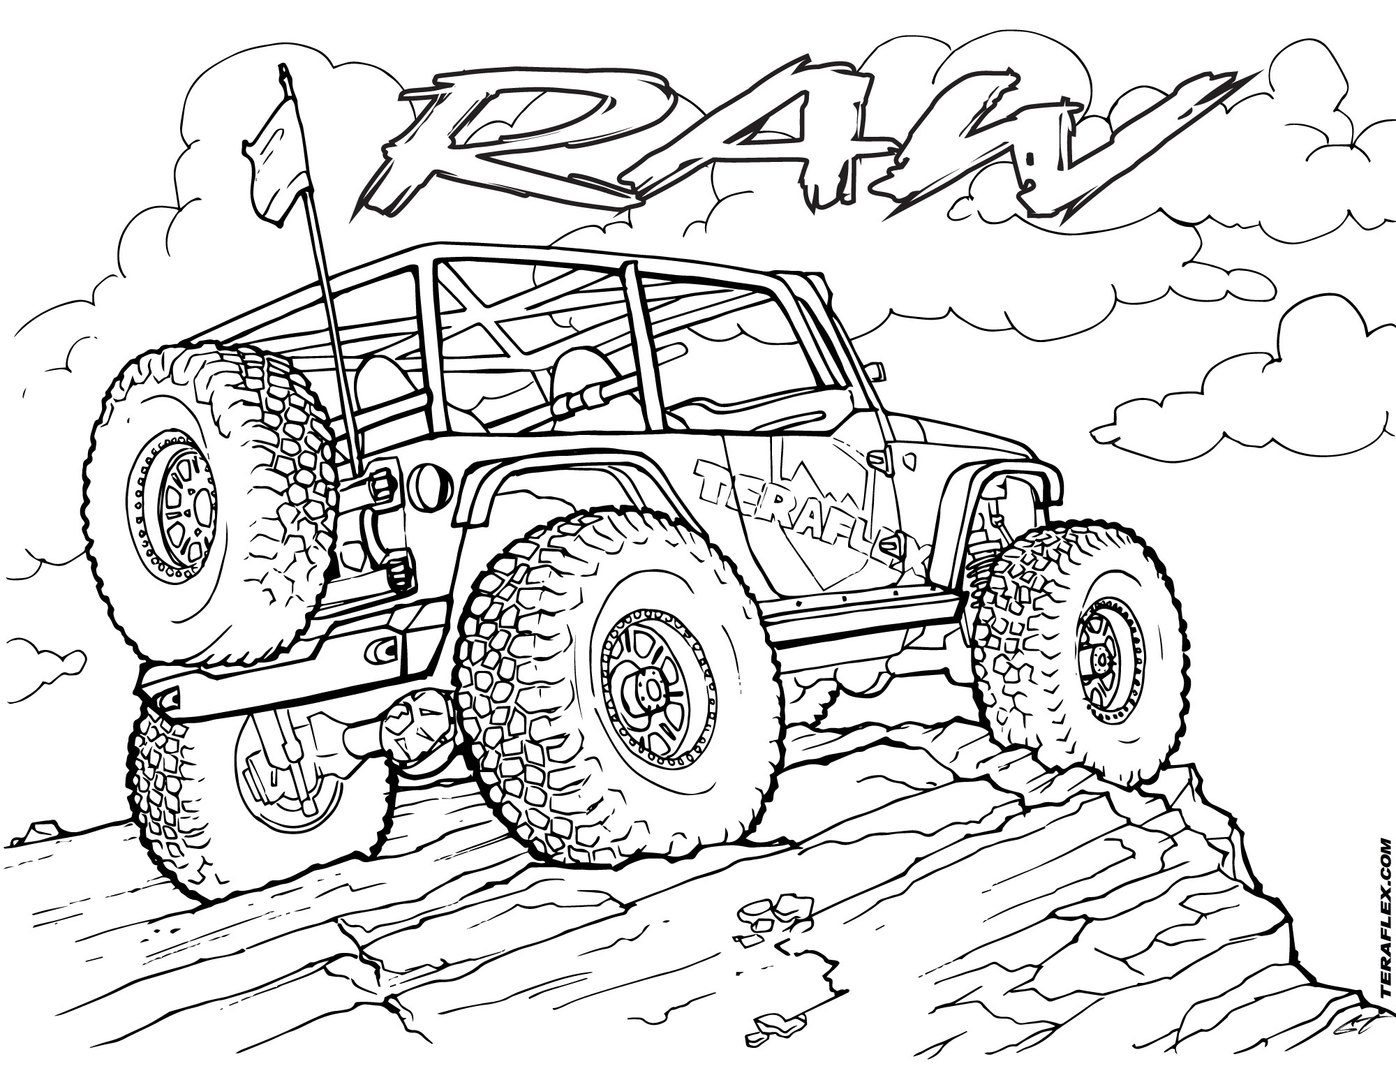 Cherokee Coloring Pages at GetColorings.com  Free printable colorings